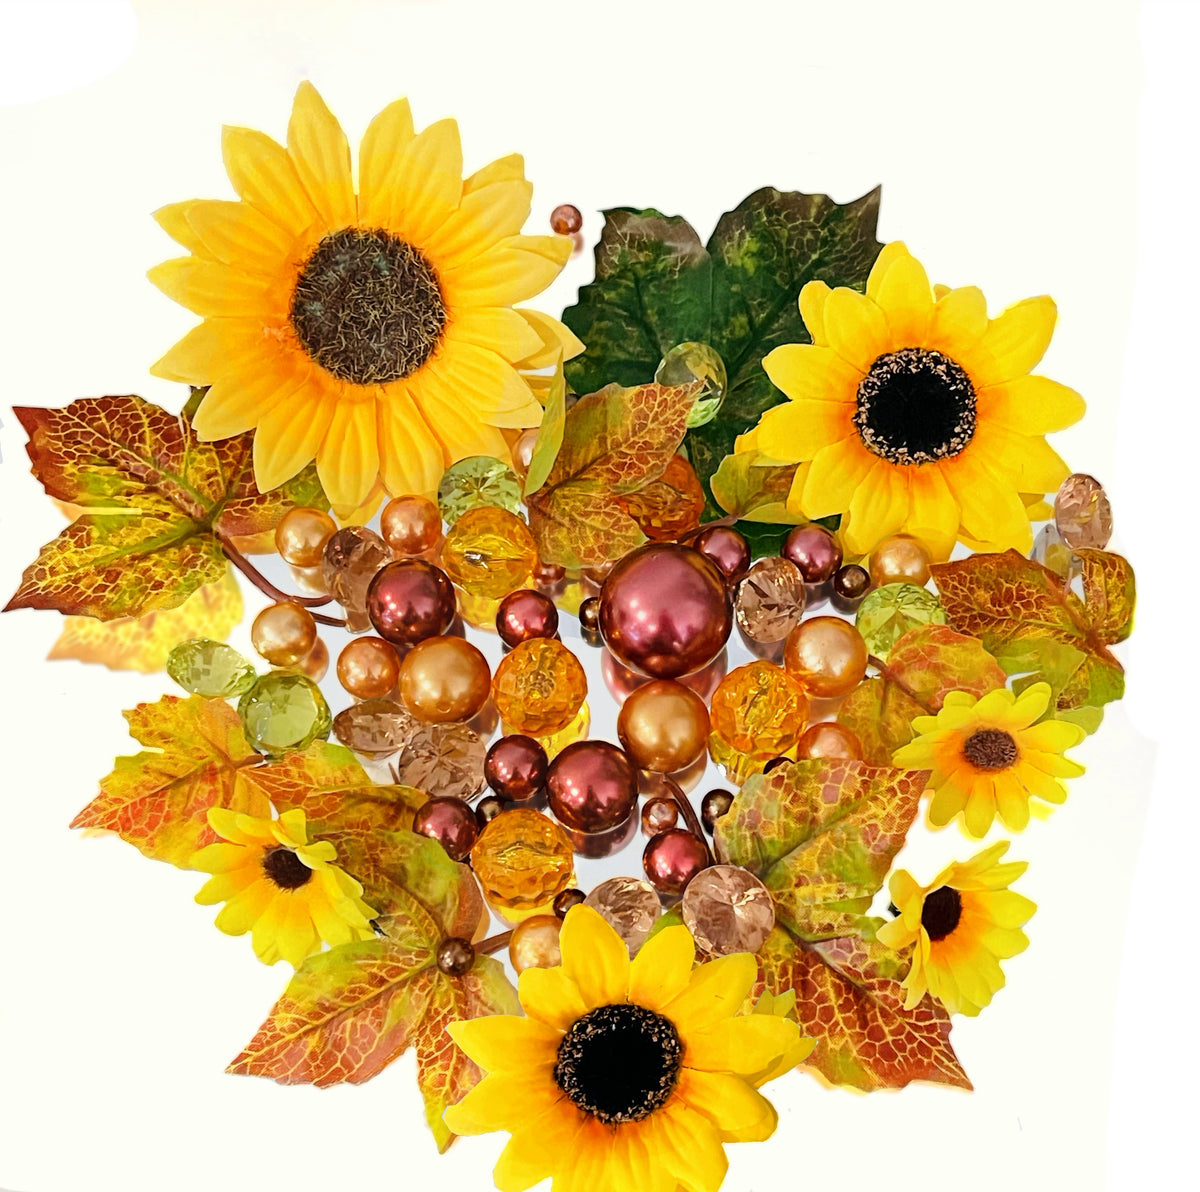 70 Floating Shades of Realistic Fall Leaves, Pearls & Gems-1 Pk Fills 1 Gallon of Gels For Floating Effect-With Exclusive Transparent Gels Measured Kit-Options: Sunflowers-Submersible Fairy Lights-Vase Decorations